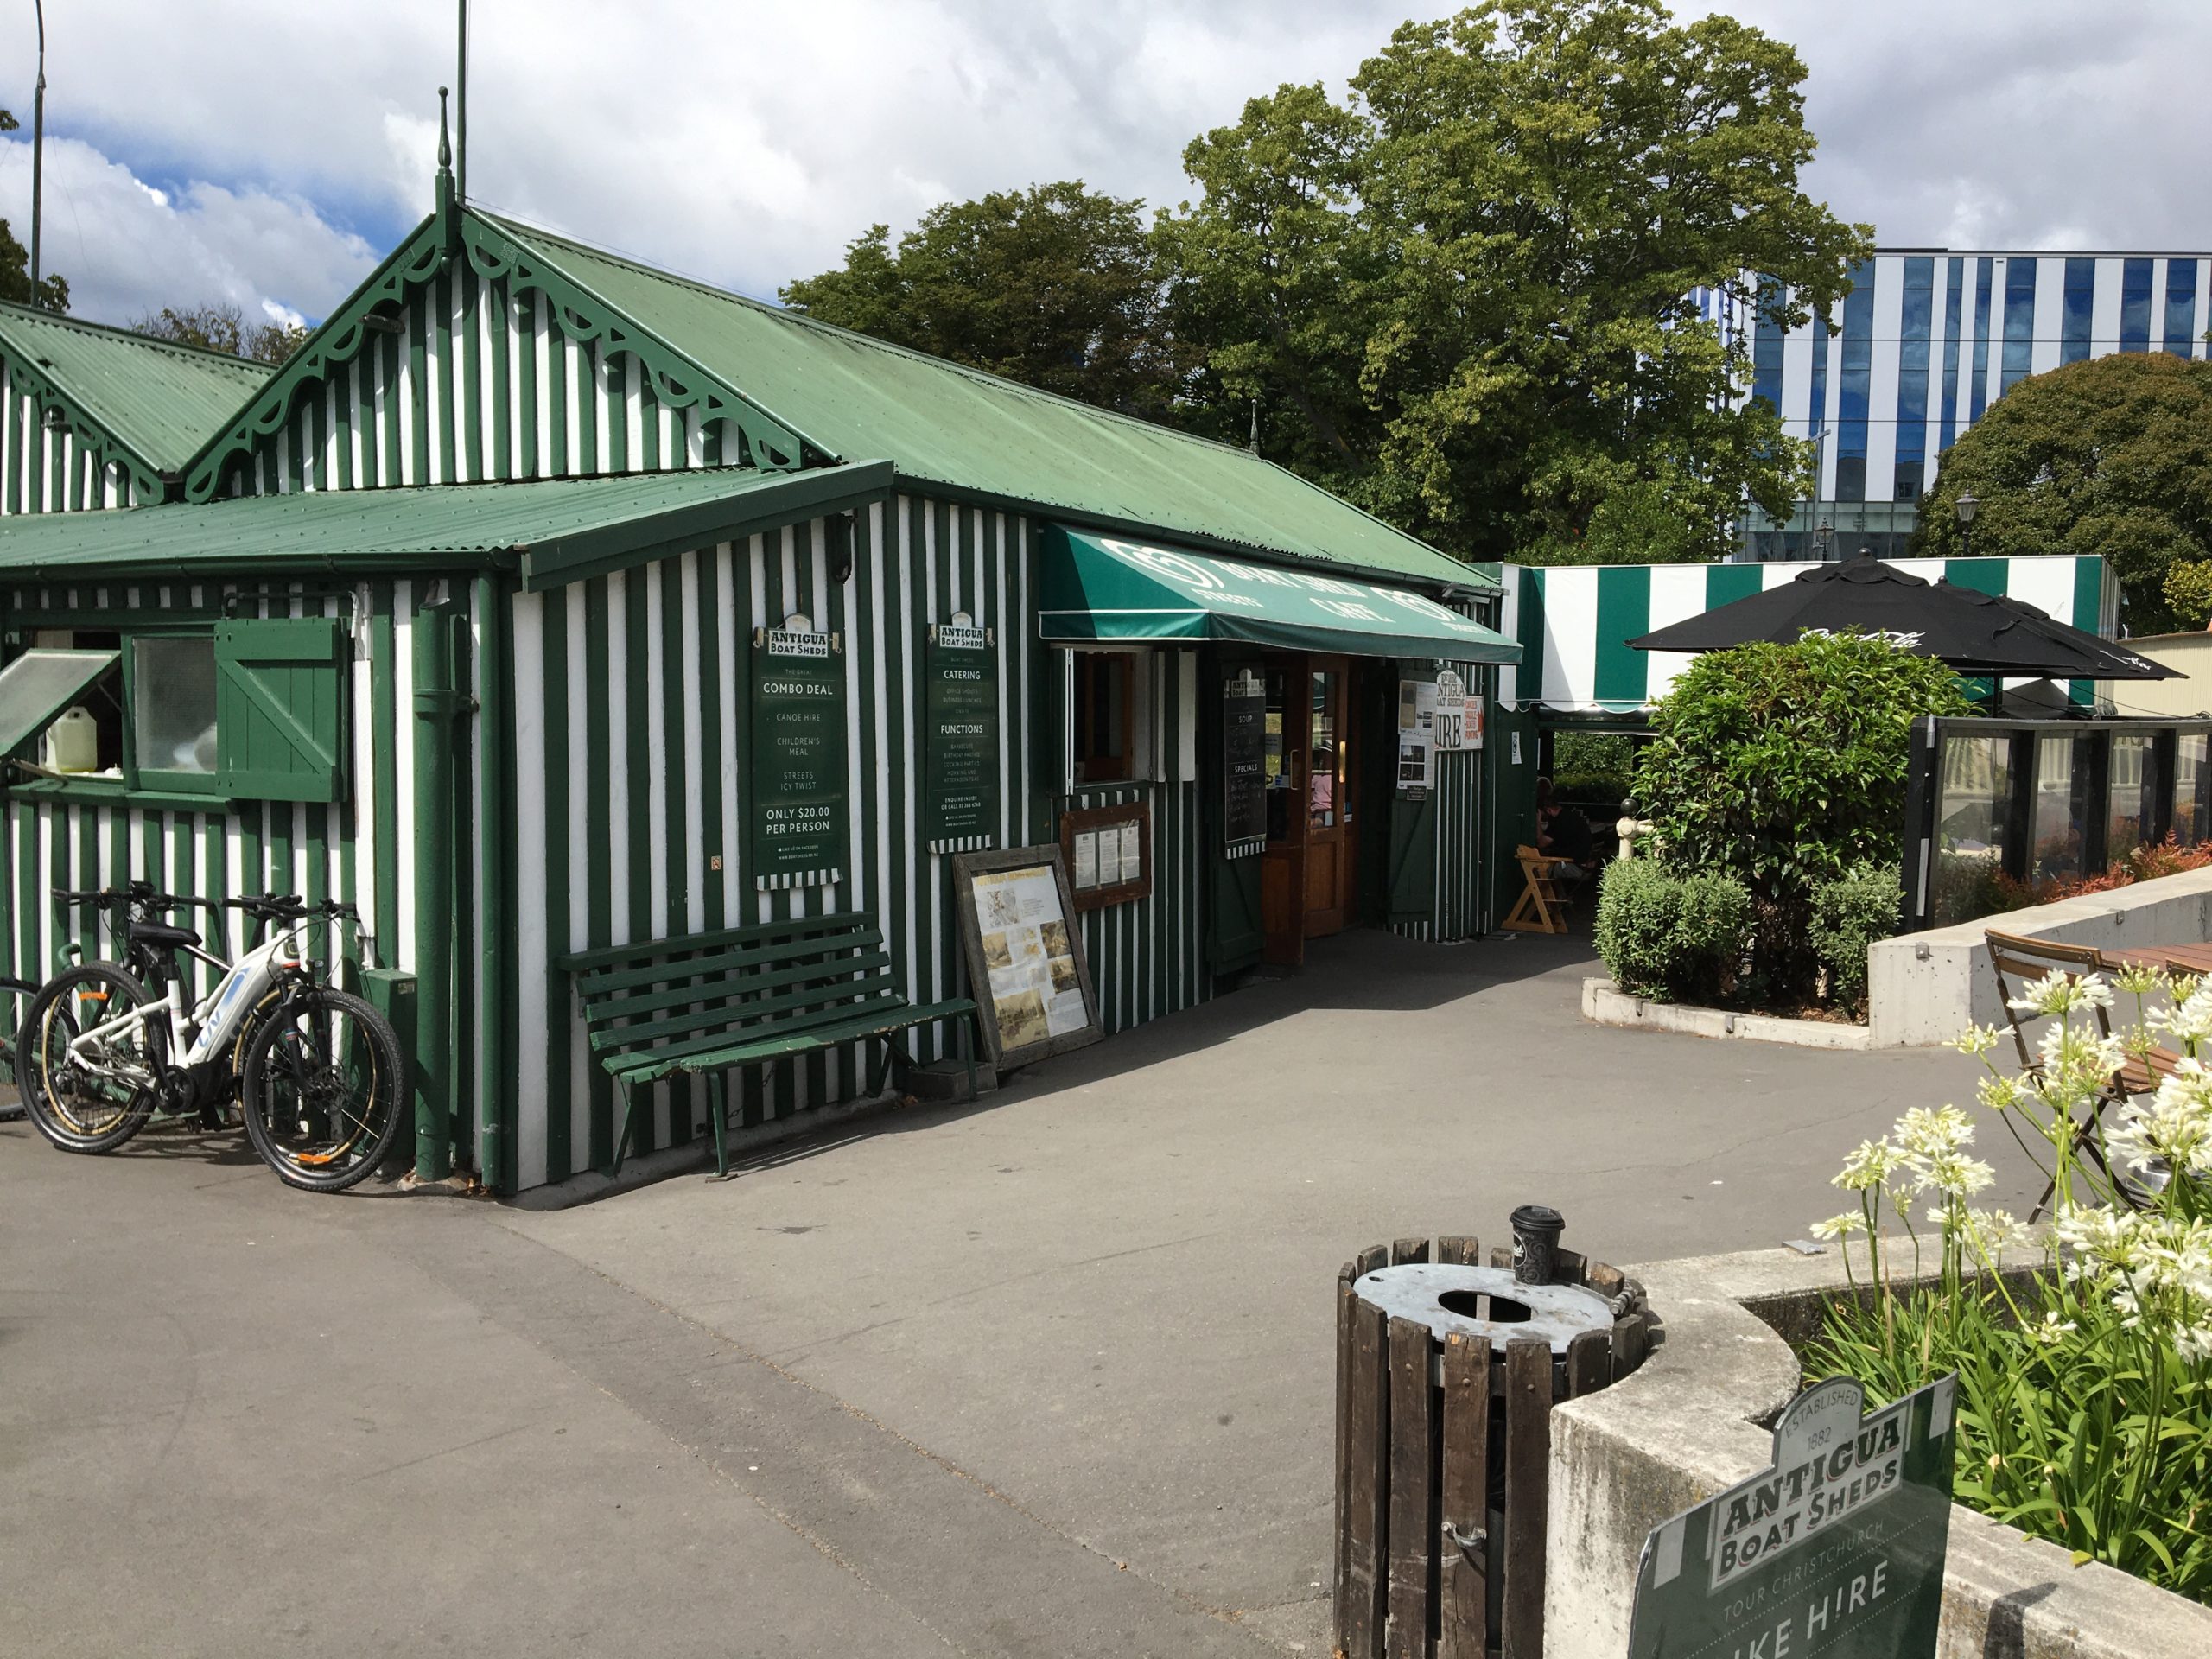 Antigua Boat Shed Cafe and Canoe Hire Christchurch - Stopping off for Brunch